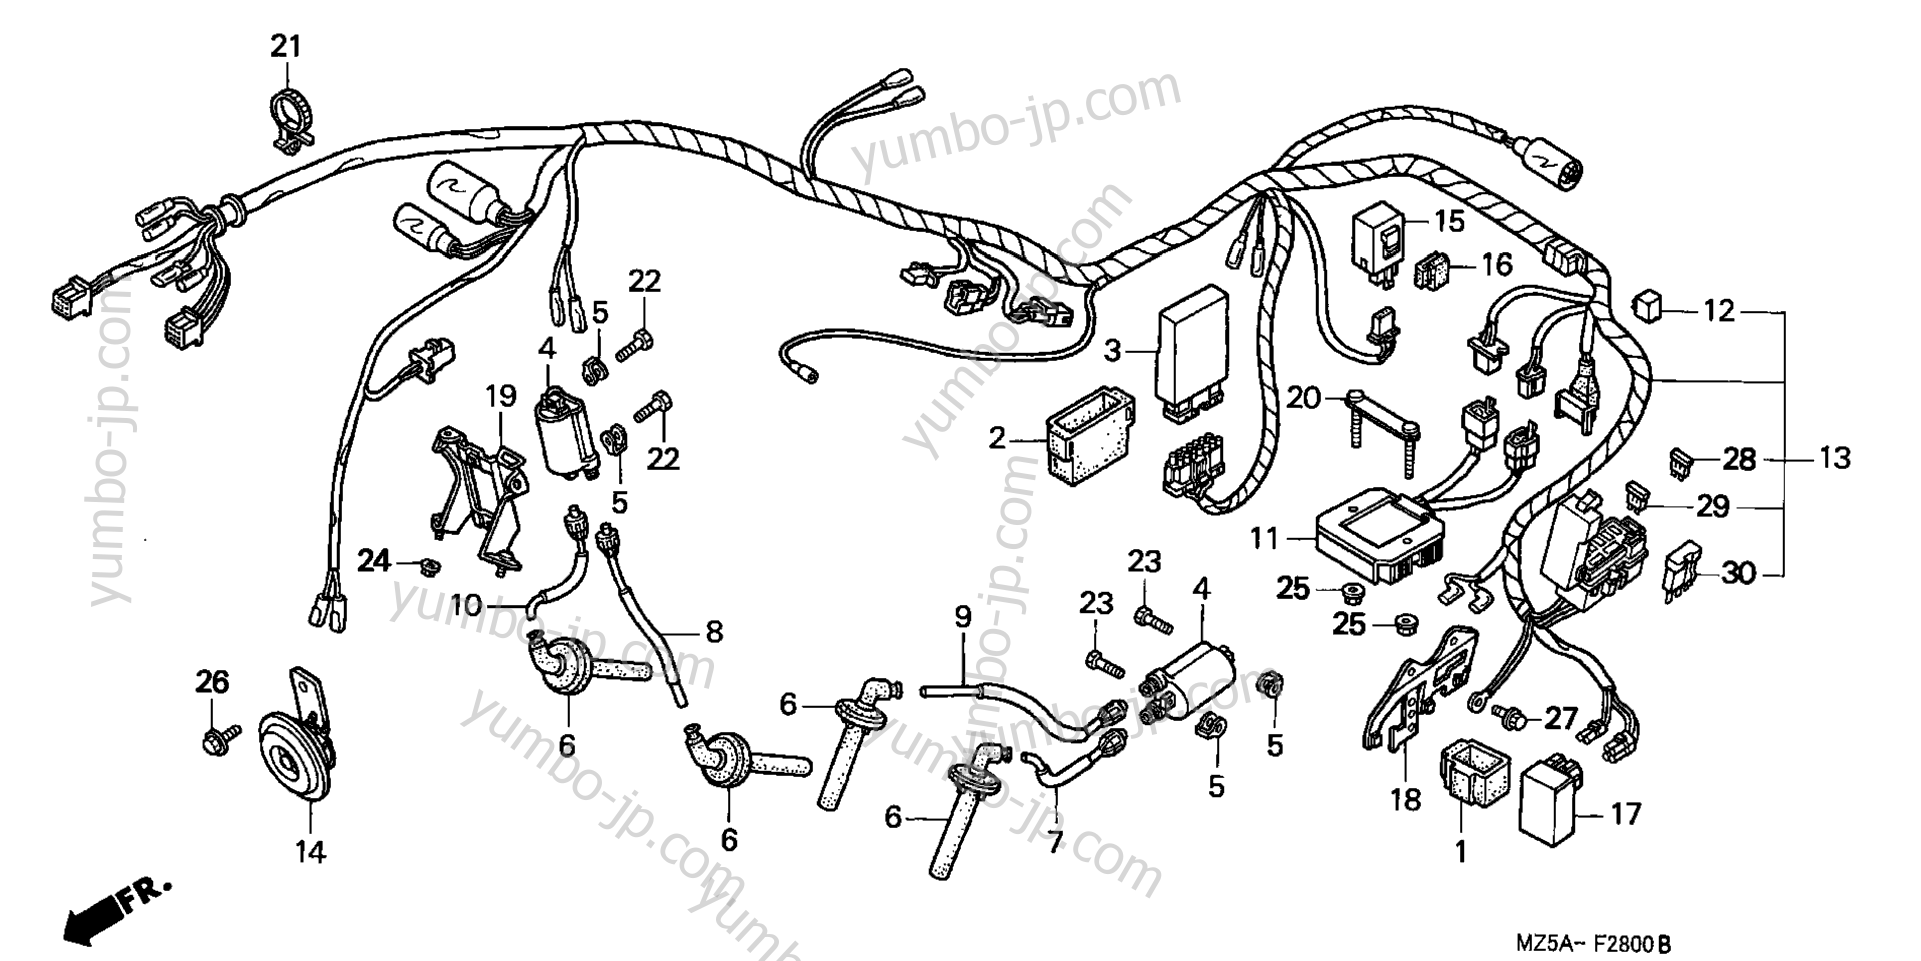 WIRE HARNESS for motorcycles HONDA VF750C2 A 1999 year